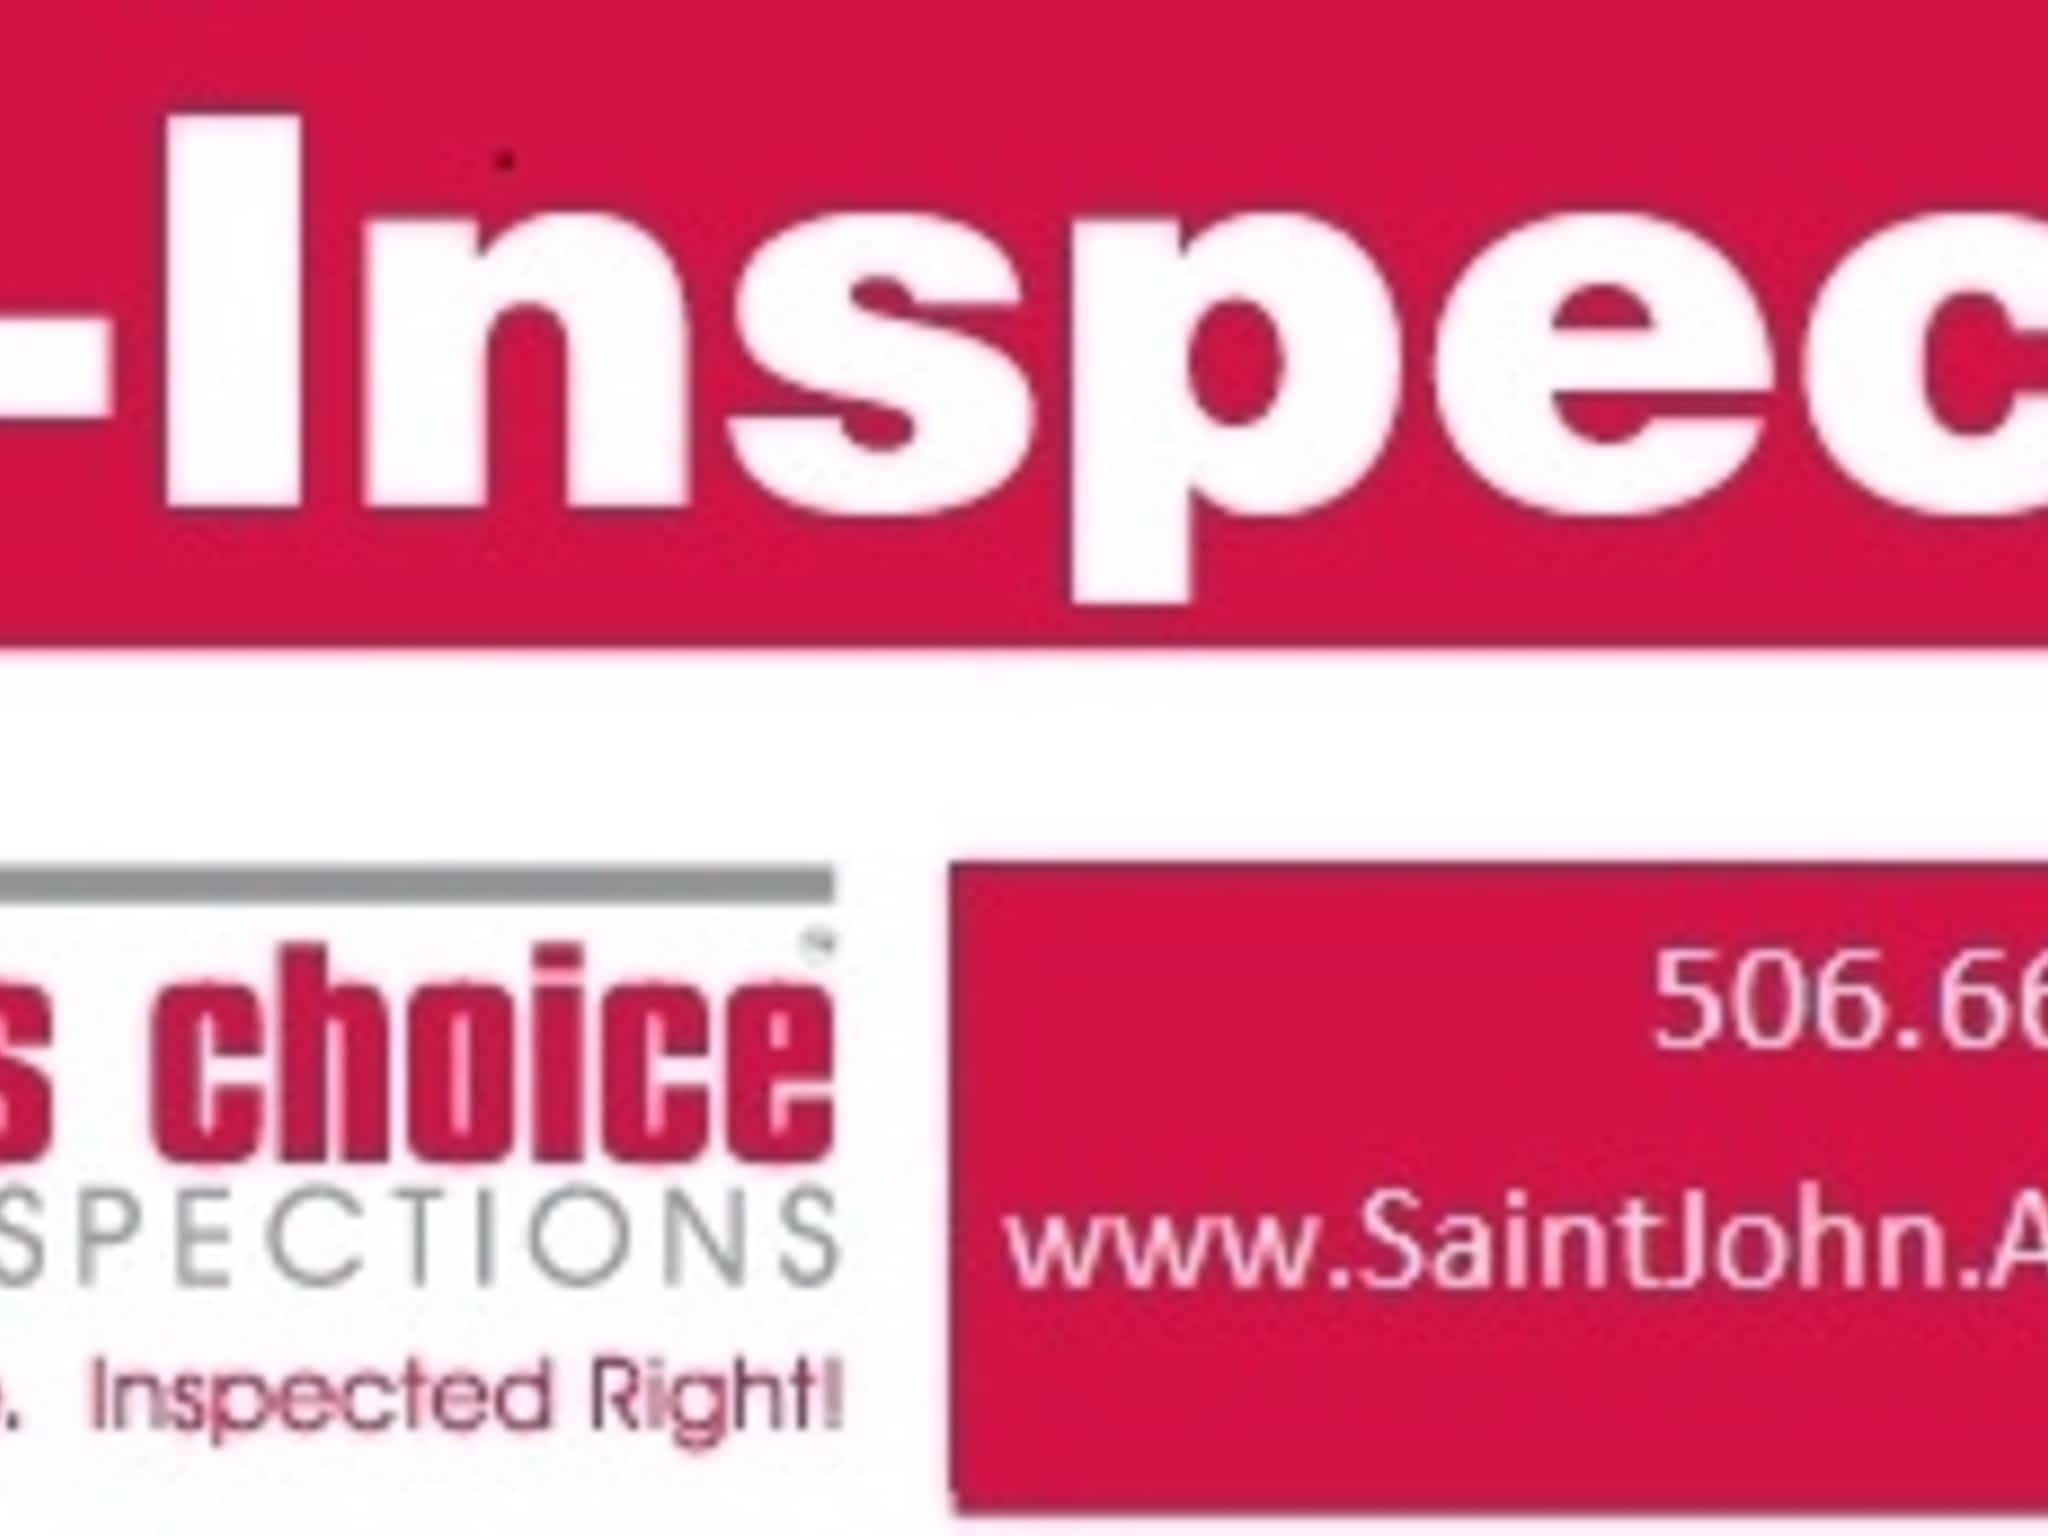 photo A Buyer's Choice Home Inspections